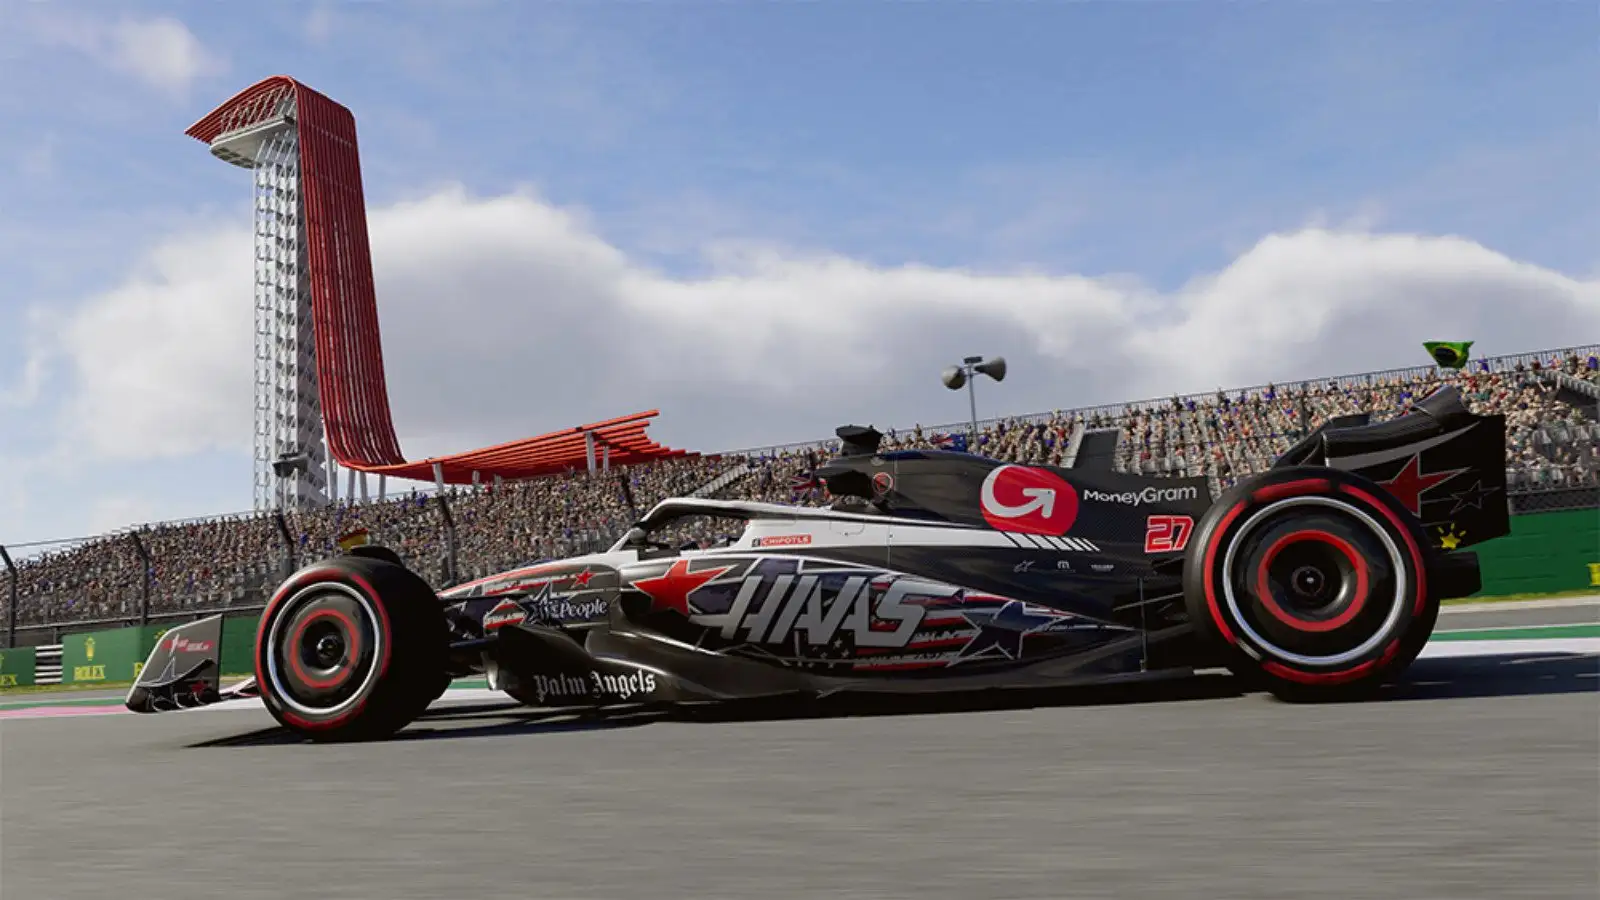 Haas's VF-23 presented in its special Moneygram livery for the United States Grand Prix.